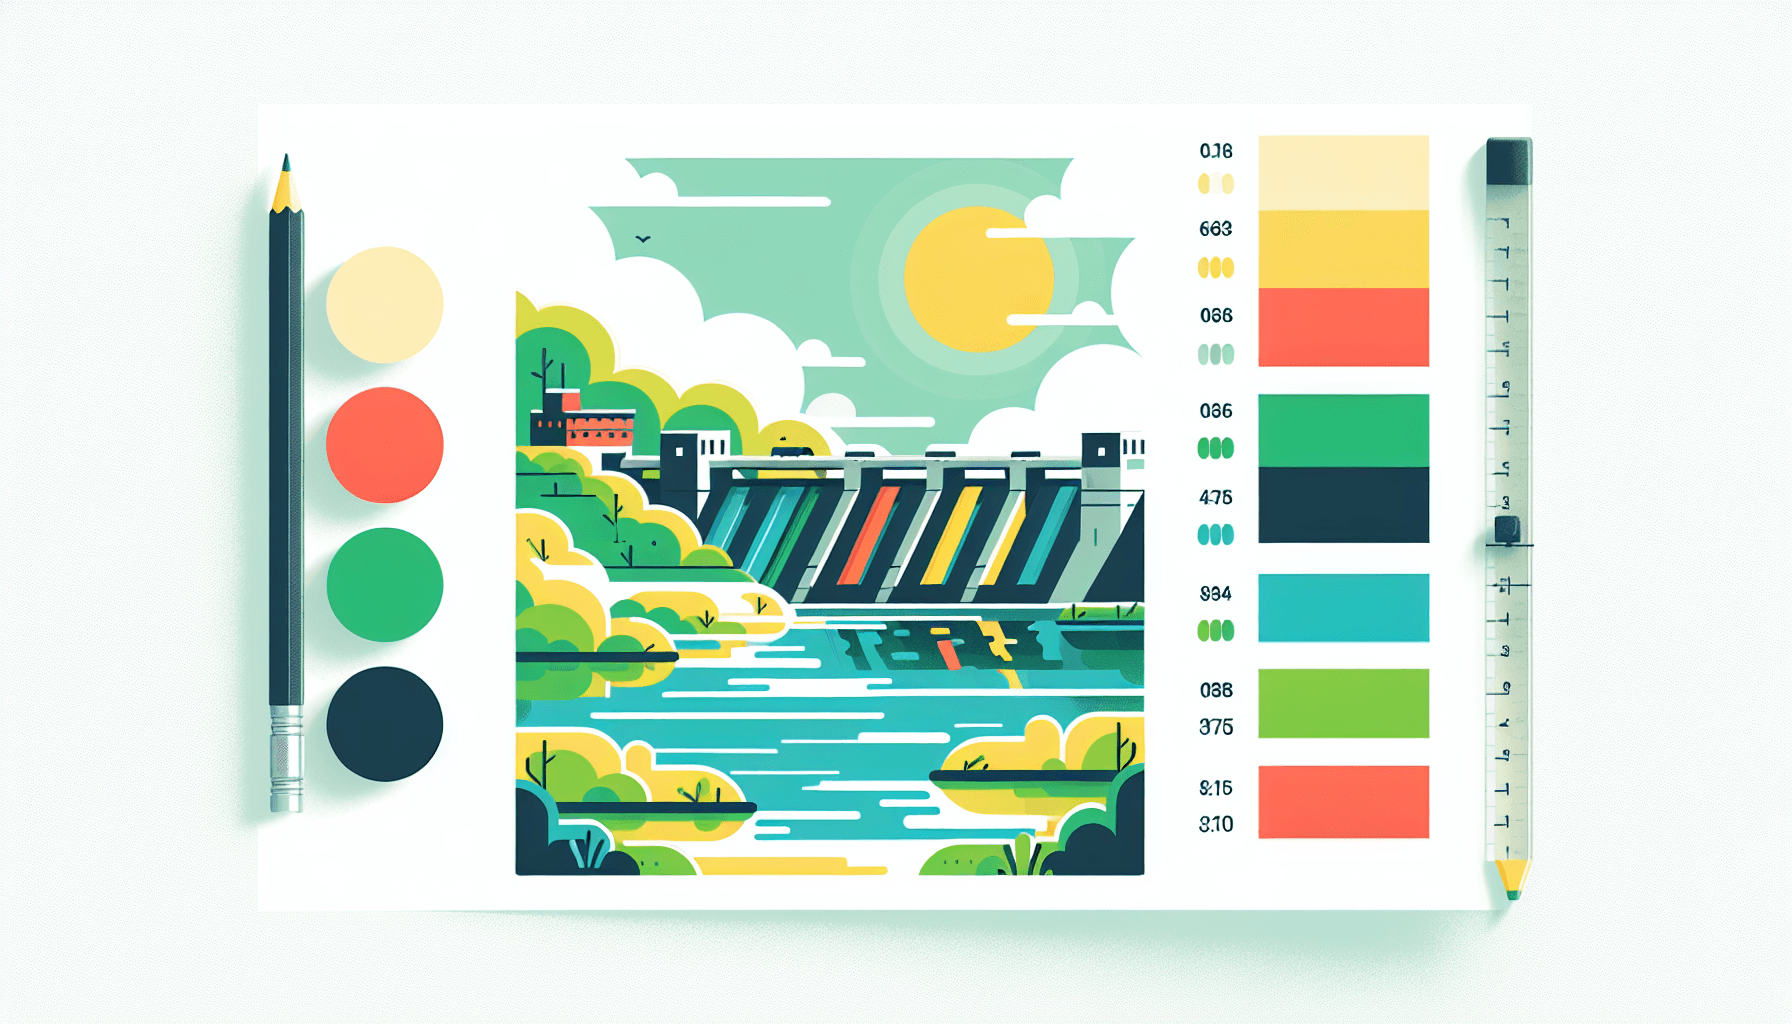 Dam in flat illustration style and white background, red #f47574, green #88c7a8, yellow #fcc44b, and blue #645bc8 colors.